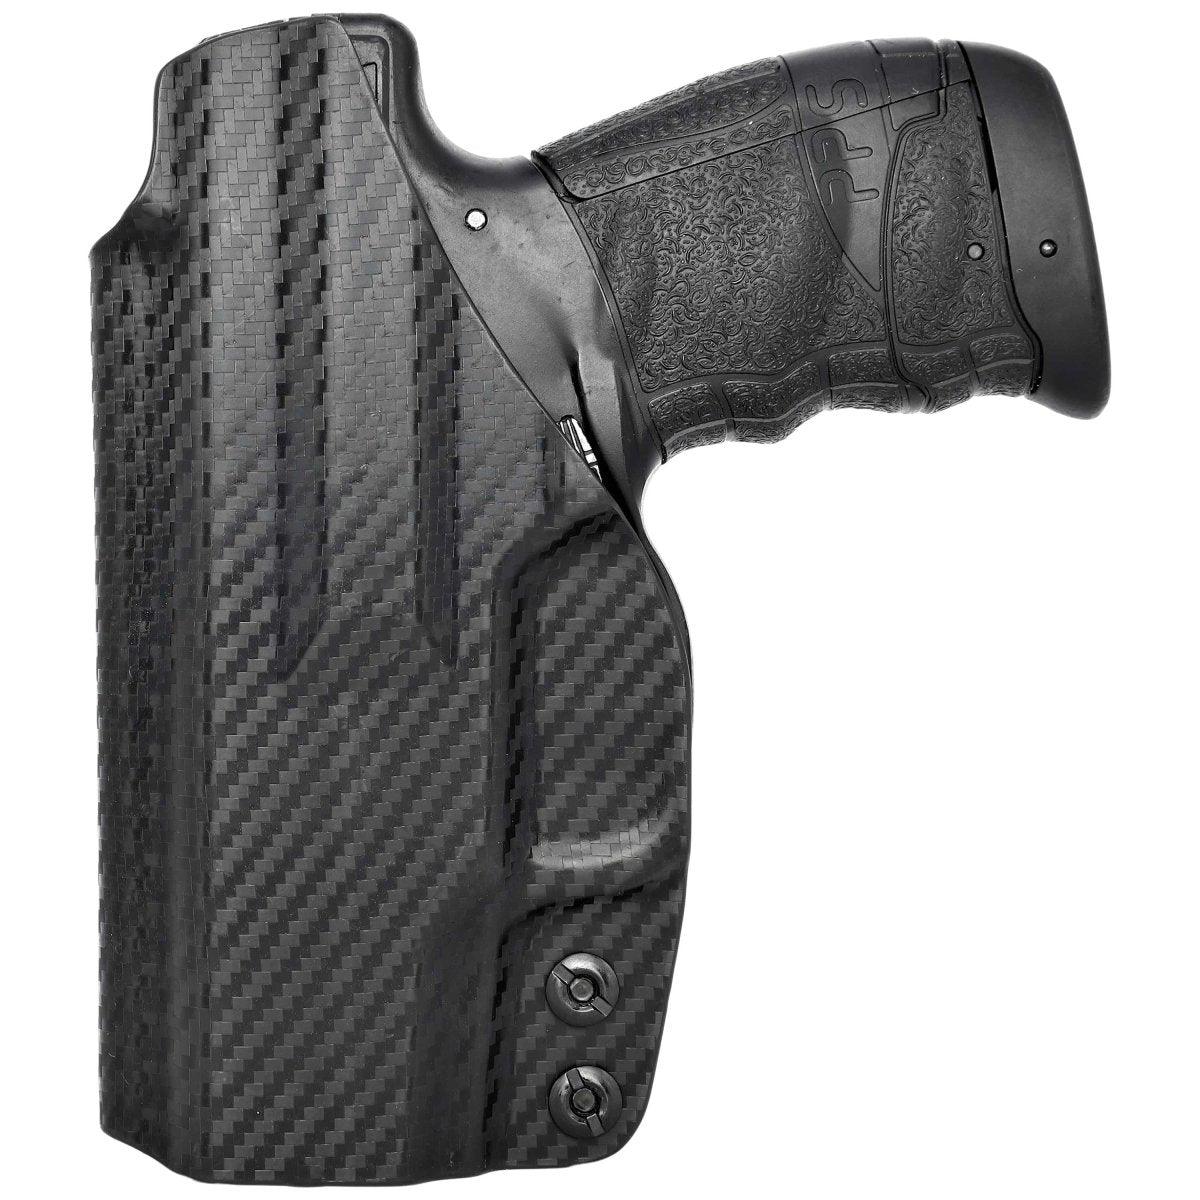 Walther PPS M2 IWB KYDEX Holster by Rounded Gear